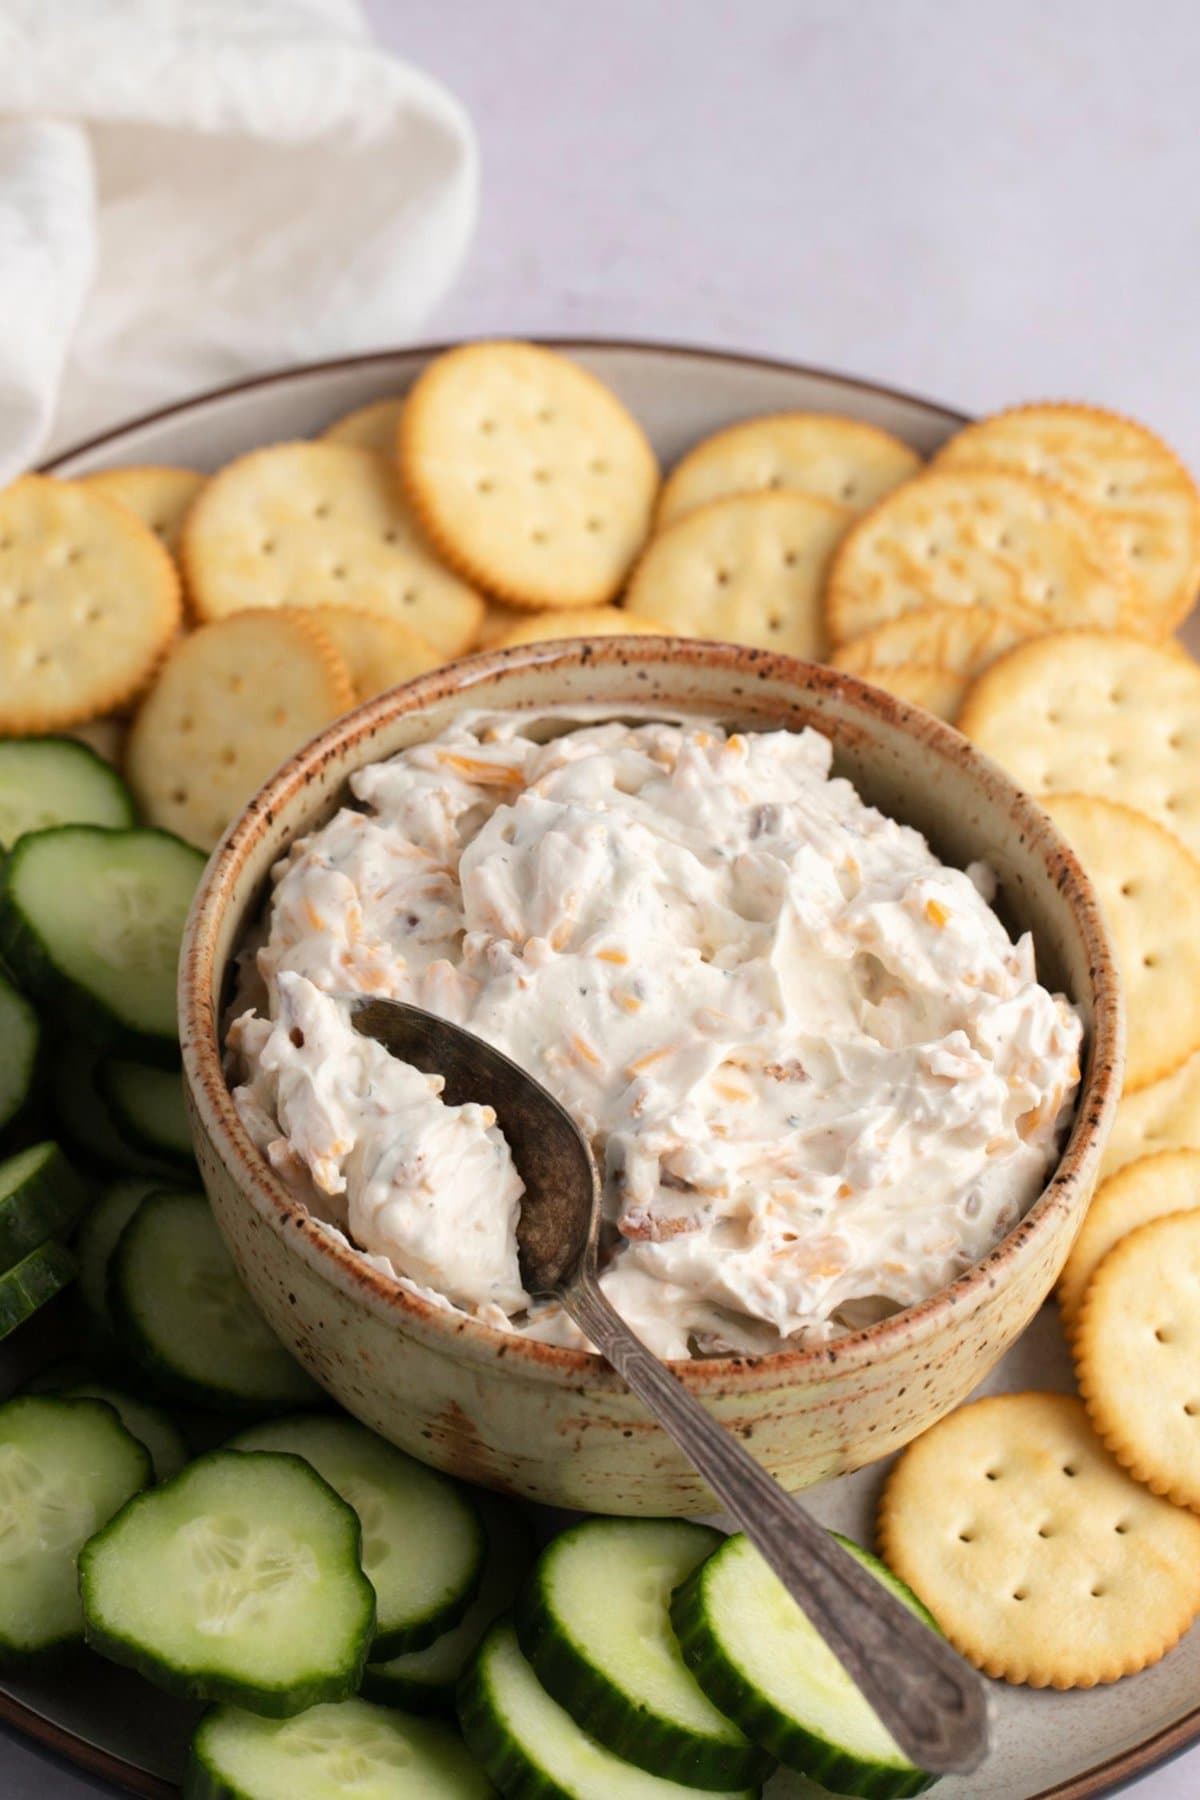 Bowl of homemade hidden valley ranch dip with bacon & cheddar served with slices of cucumbers and cracker